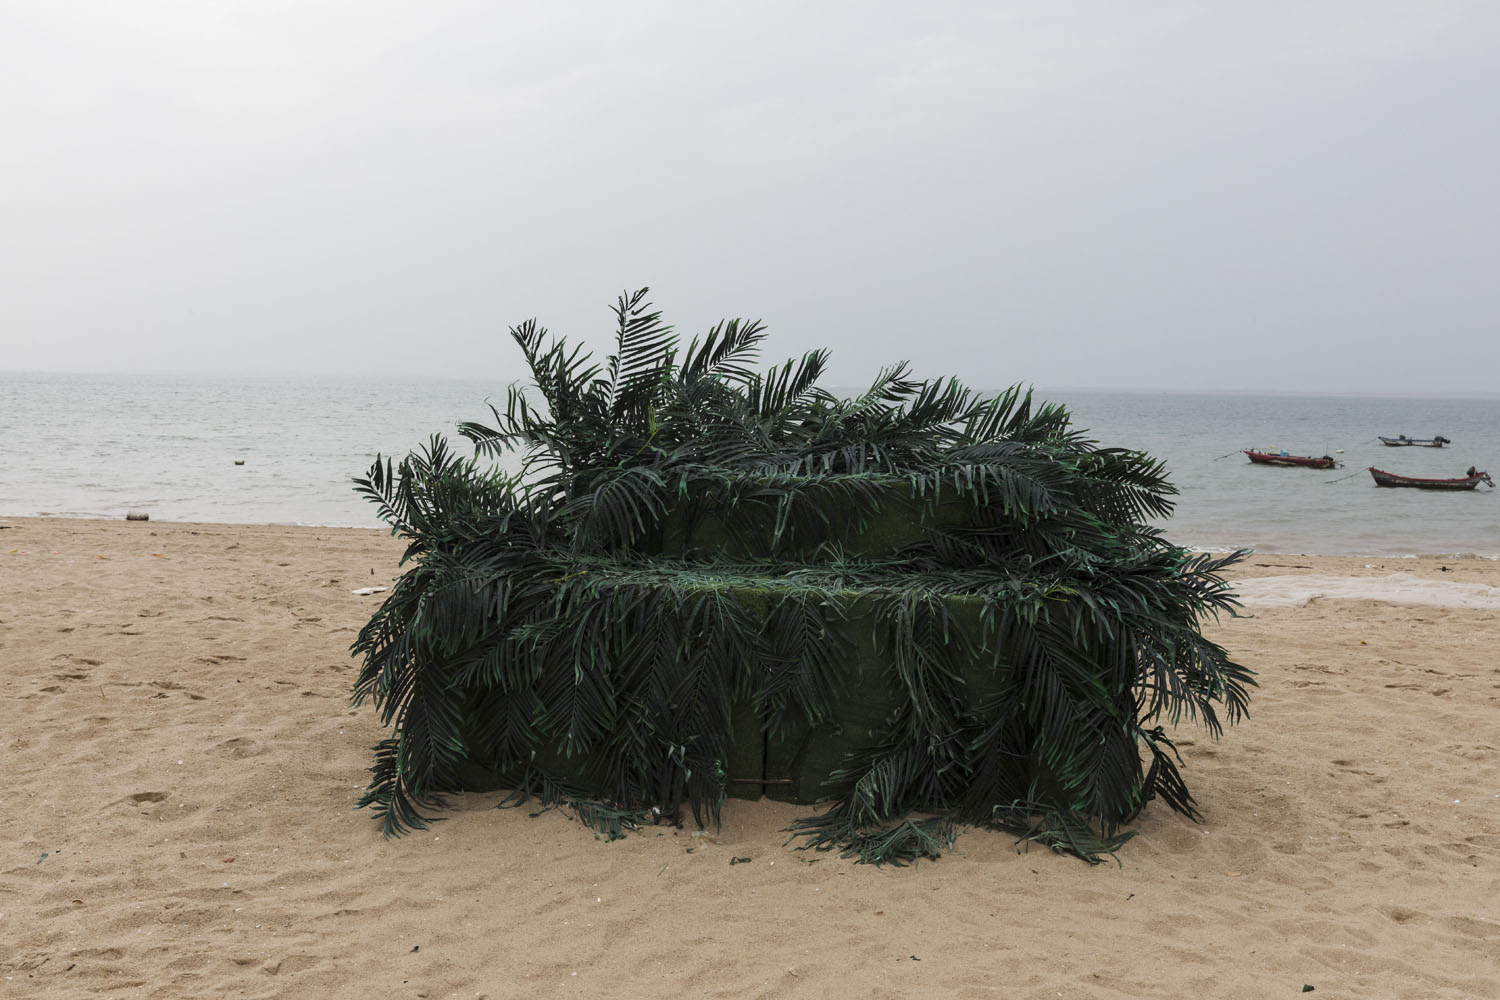 An altar decorated with imitation palm leaves, used for wedding photography at Guanyinshan Fantasy Beach. Xiamen, China. 2018.